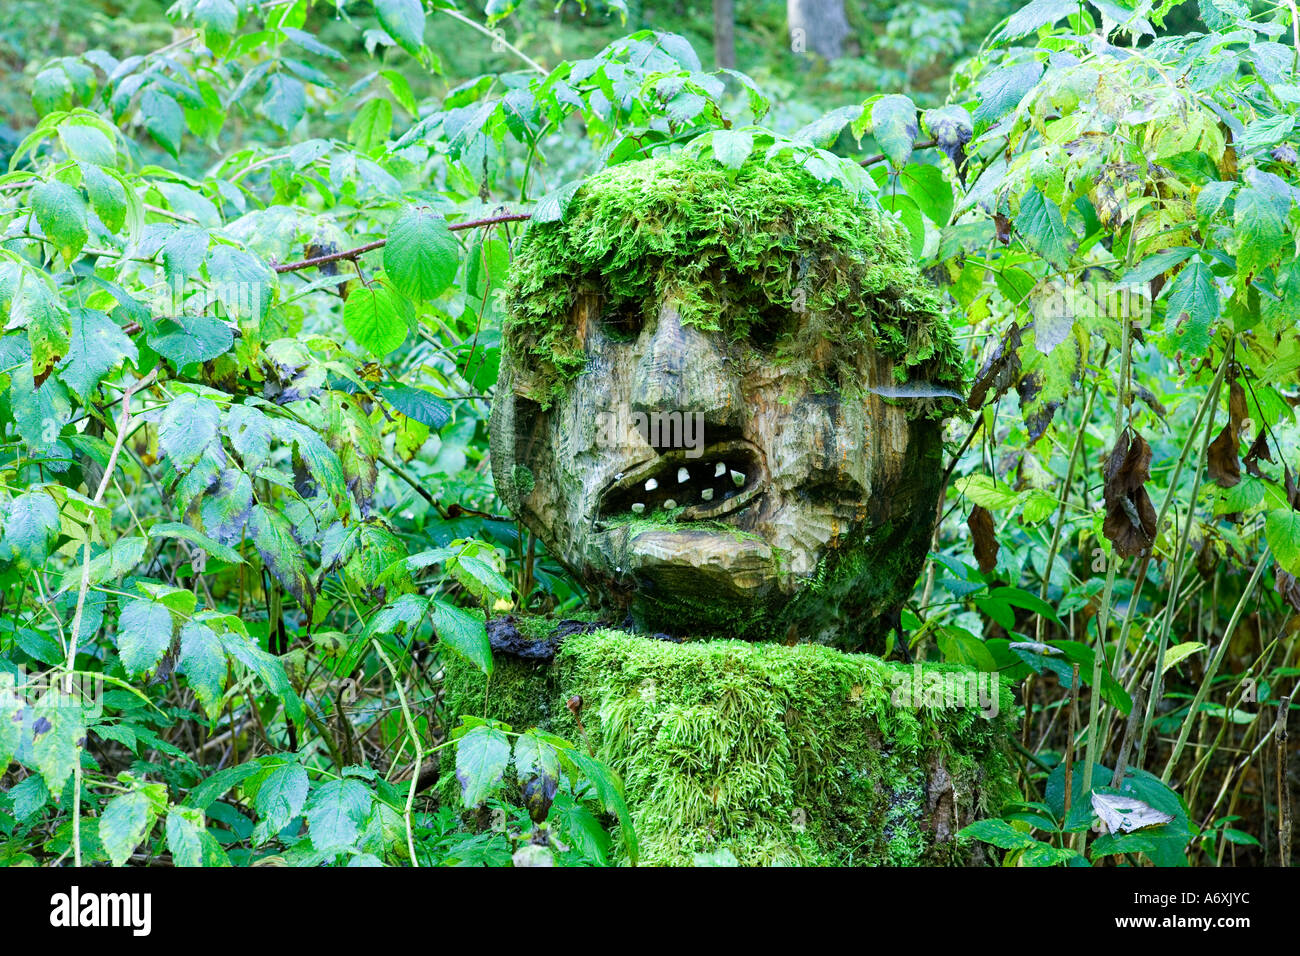 Switzerland Berner Oberland Mossy face sculpture guarding the forest Stock Photo